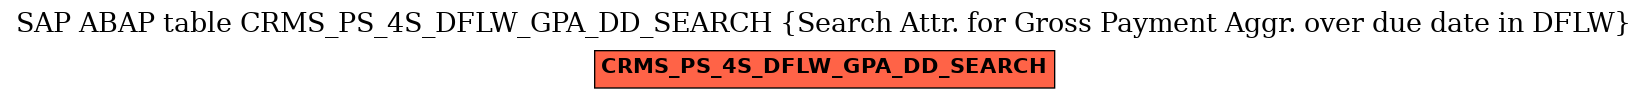 E-R Diagram for table CRMS_PS_4S_DFLW_GPA_DD_SEARCH (Search Attr. for Gross Payment Aggr. over due date in DFLW)